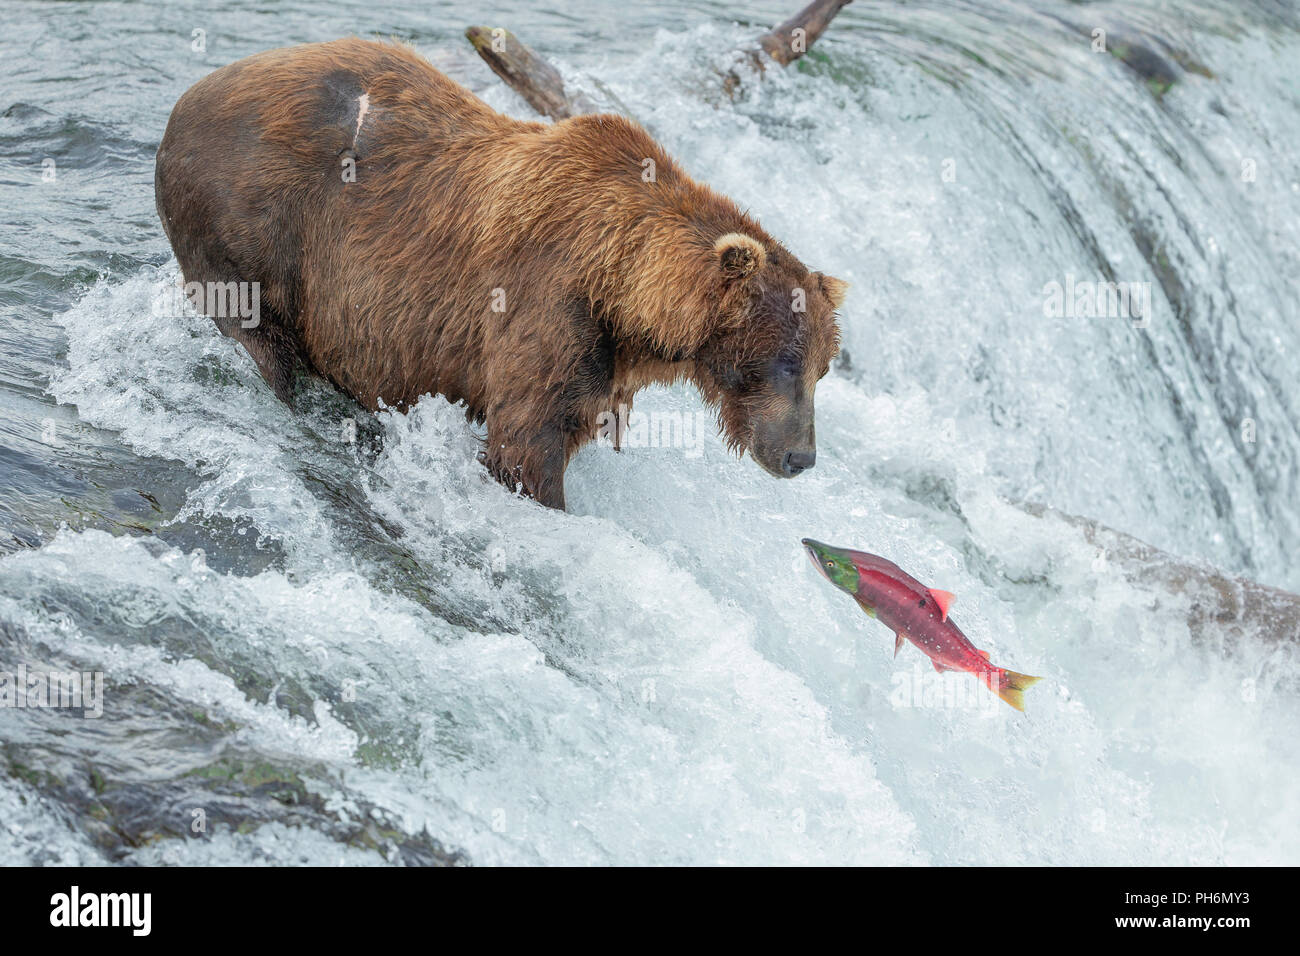 Male brown bear standing in waterfall looking intently at jumping sockeye salmon. Stock Photo